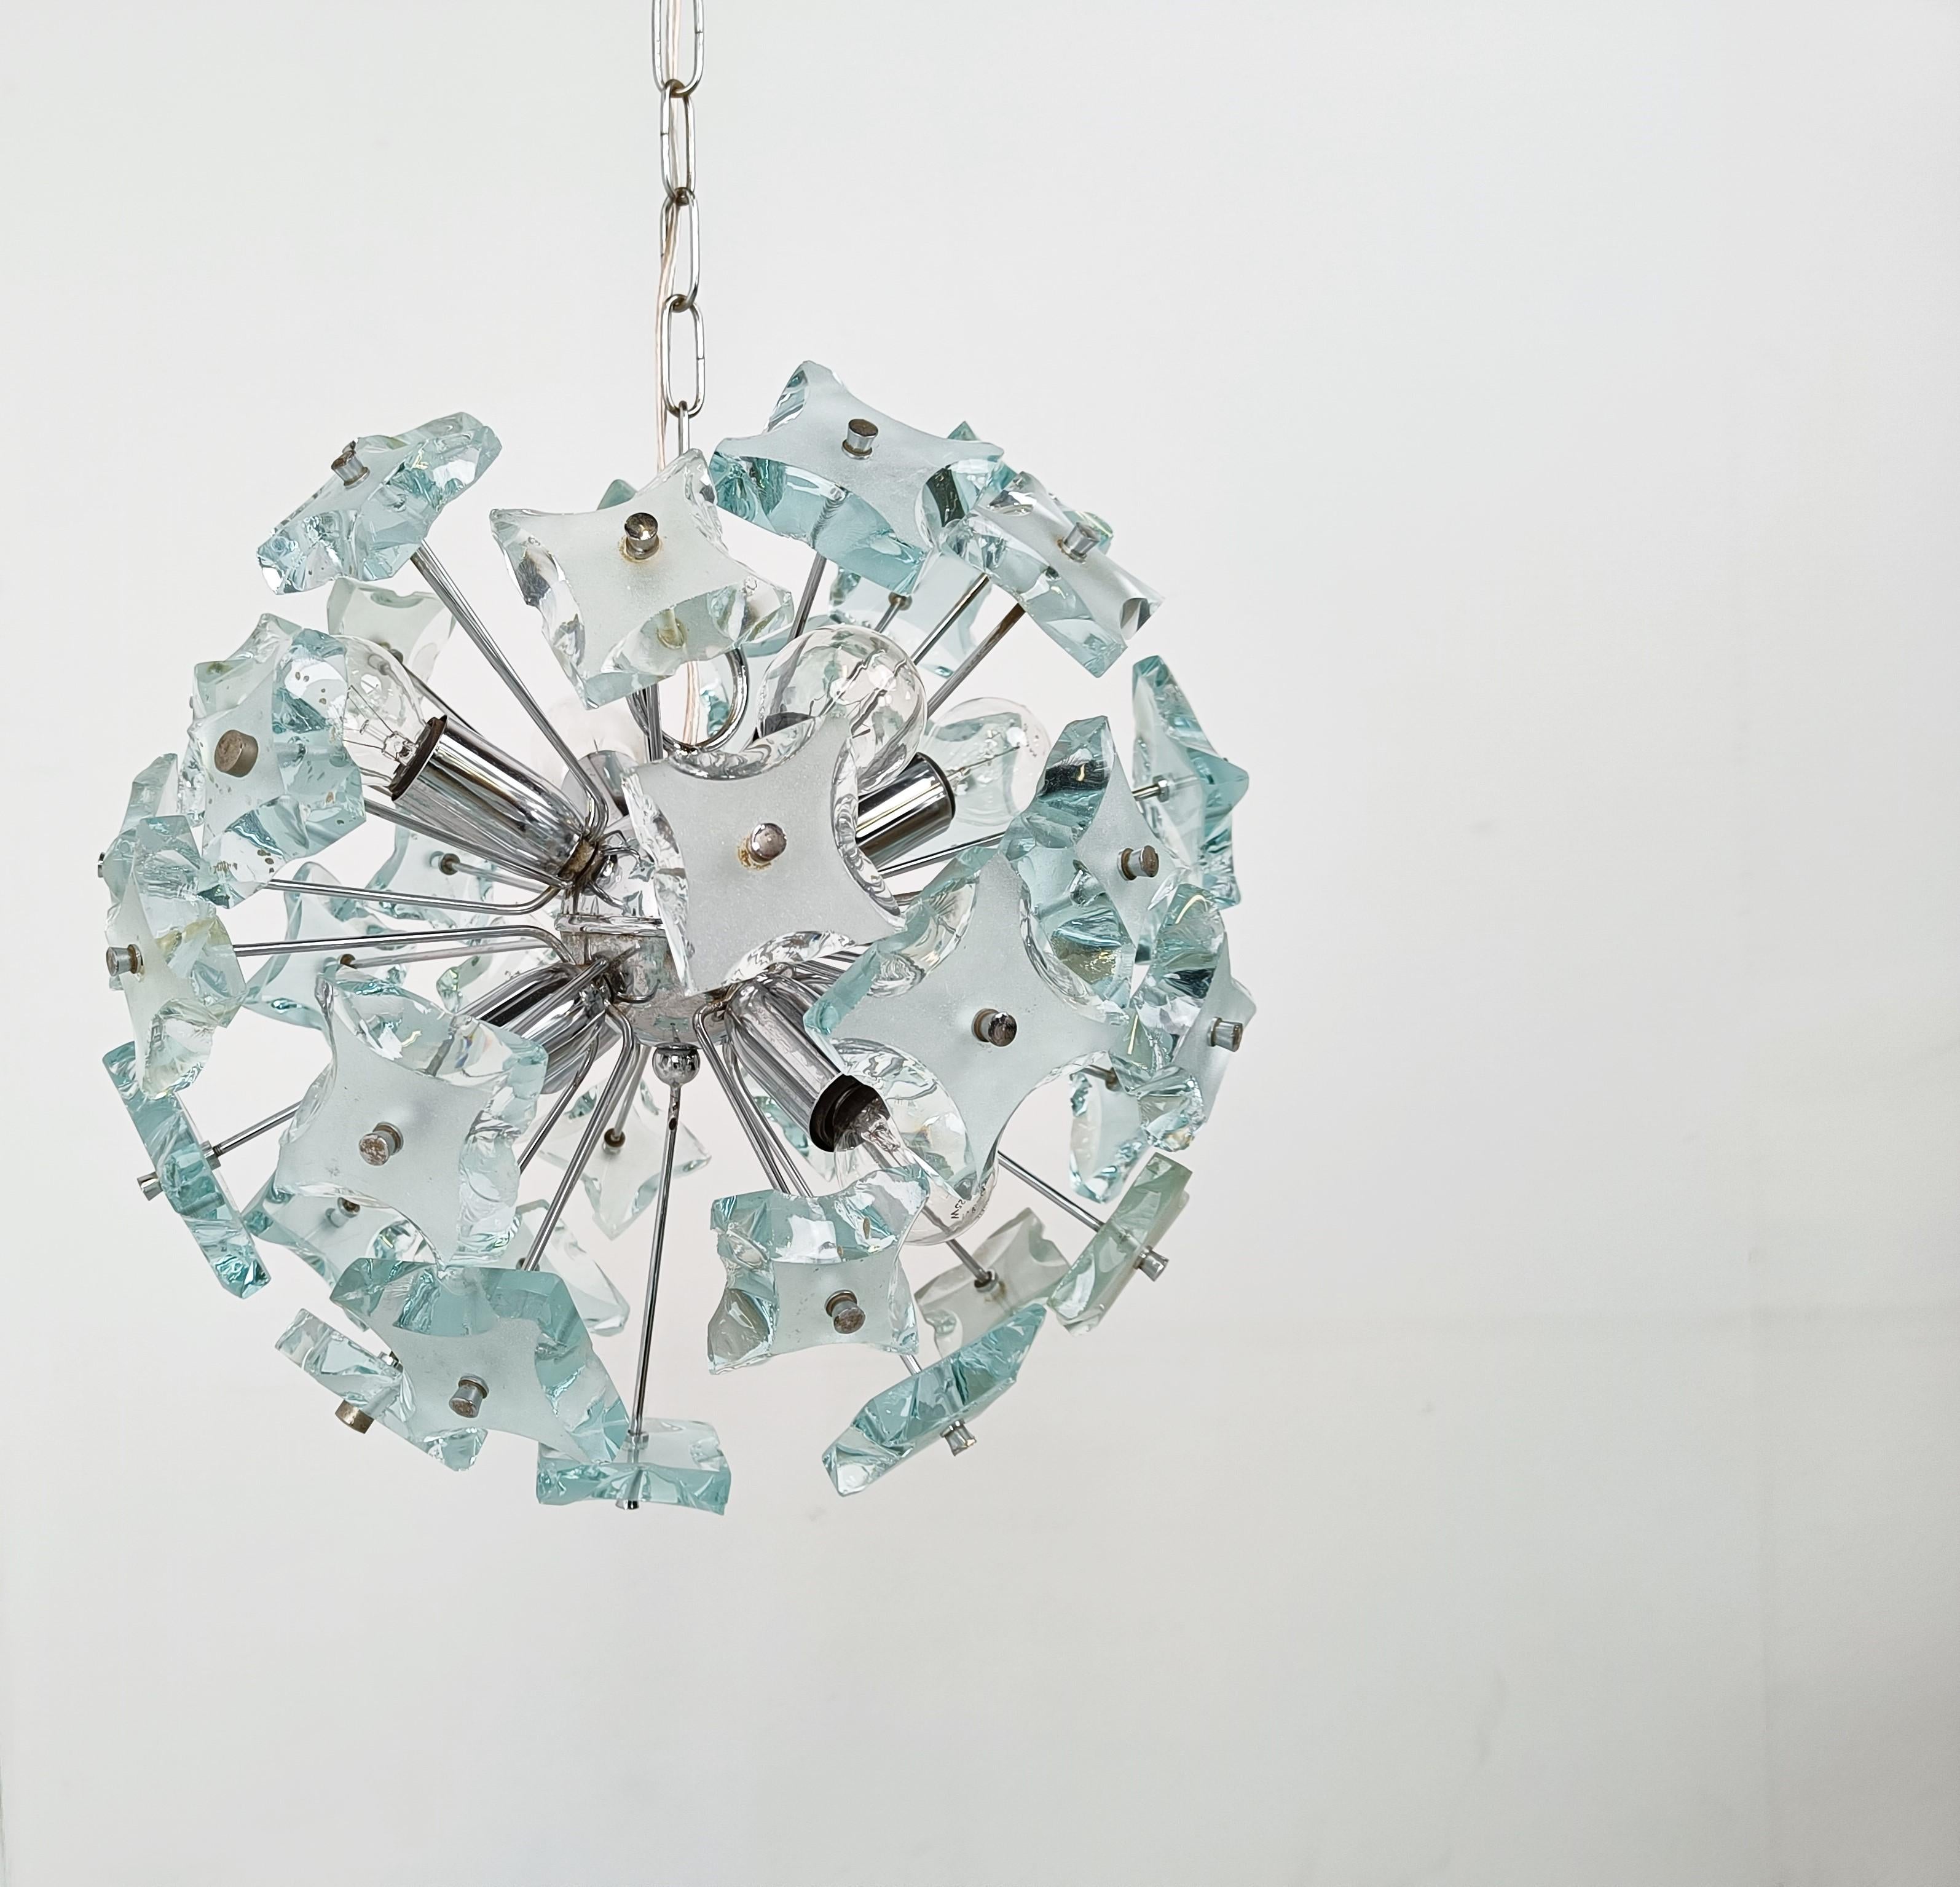 Striking sputnik shaped chandelier with blue hammered glass glasses mounted on a chrome frame.

Once illuminated, this beautiful chandelier emits a warm diffuse light.

Tested and ready to use.

We can change the chain length if